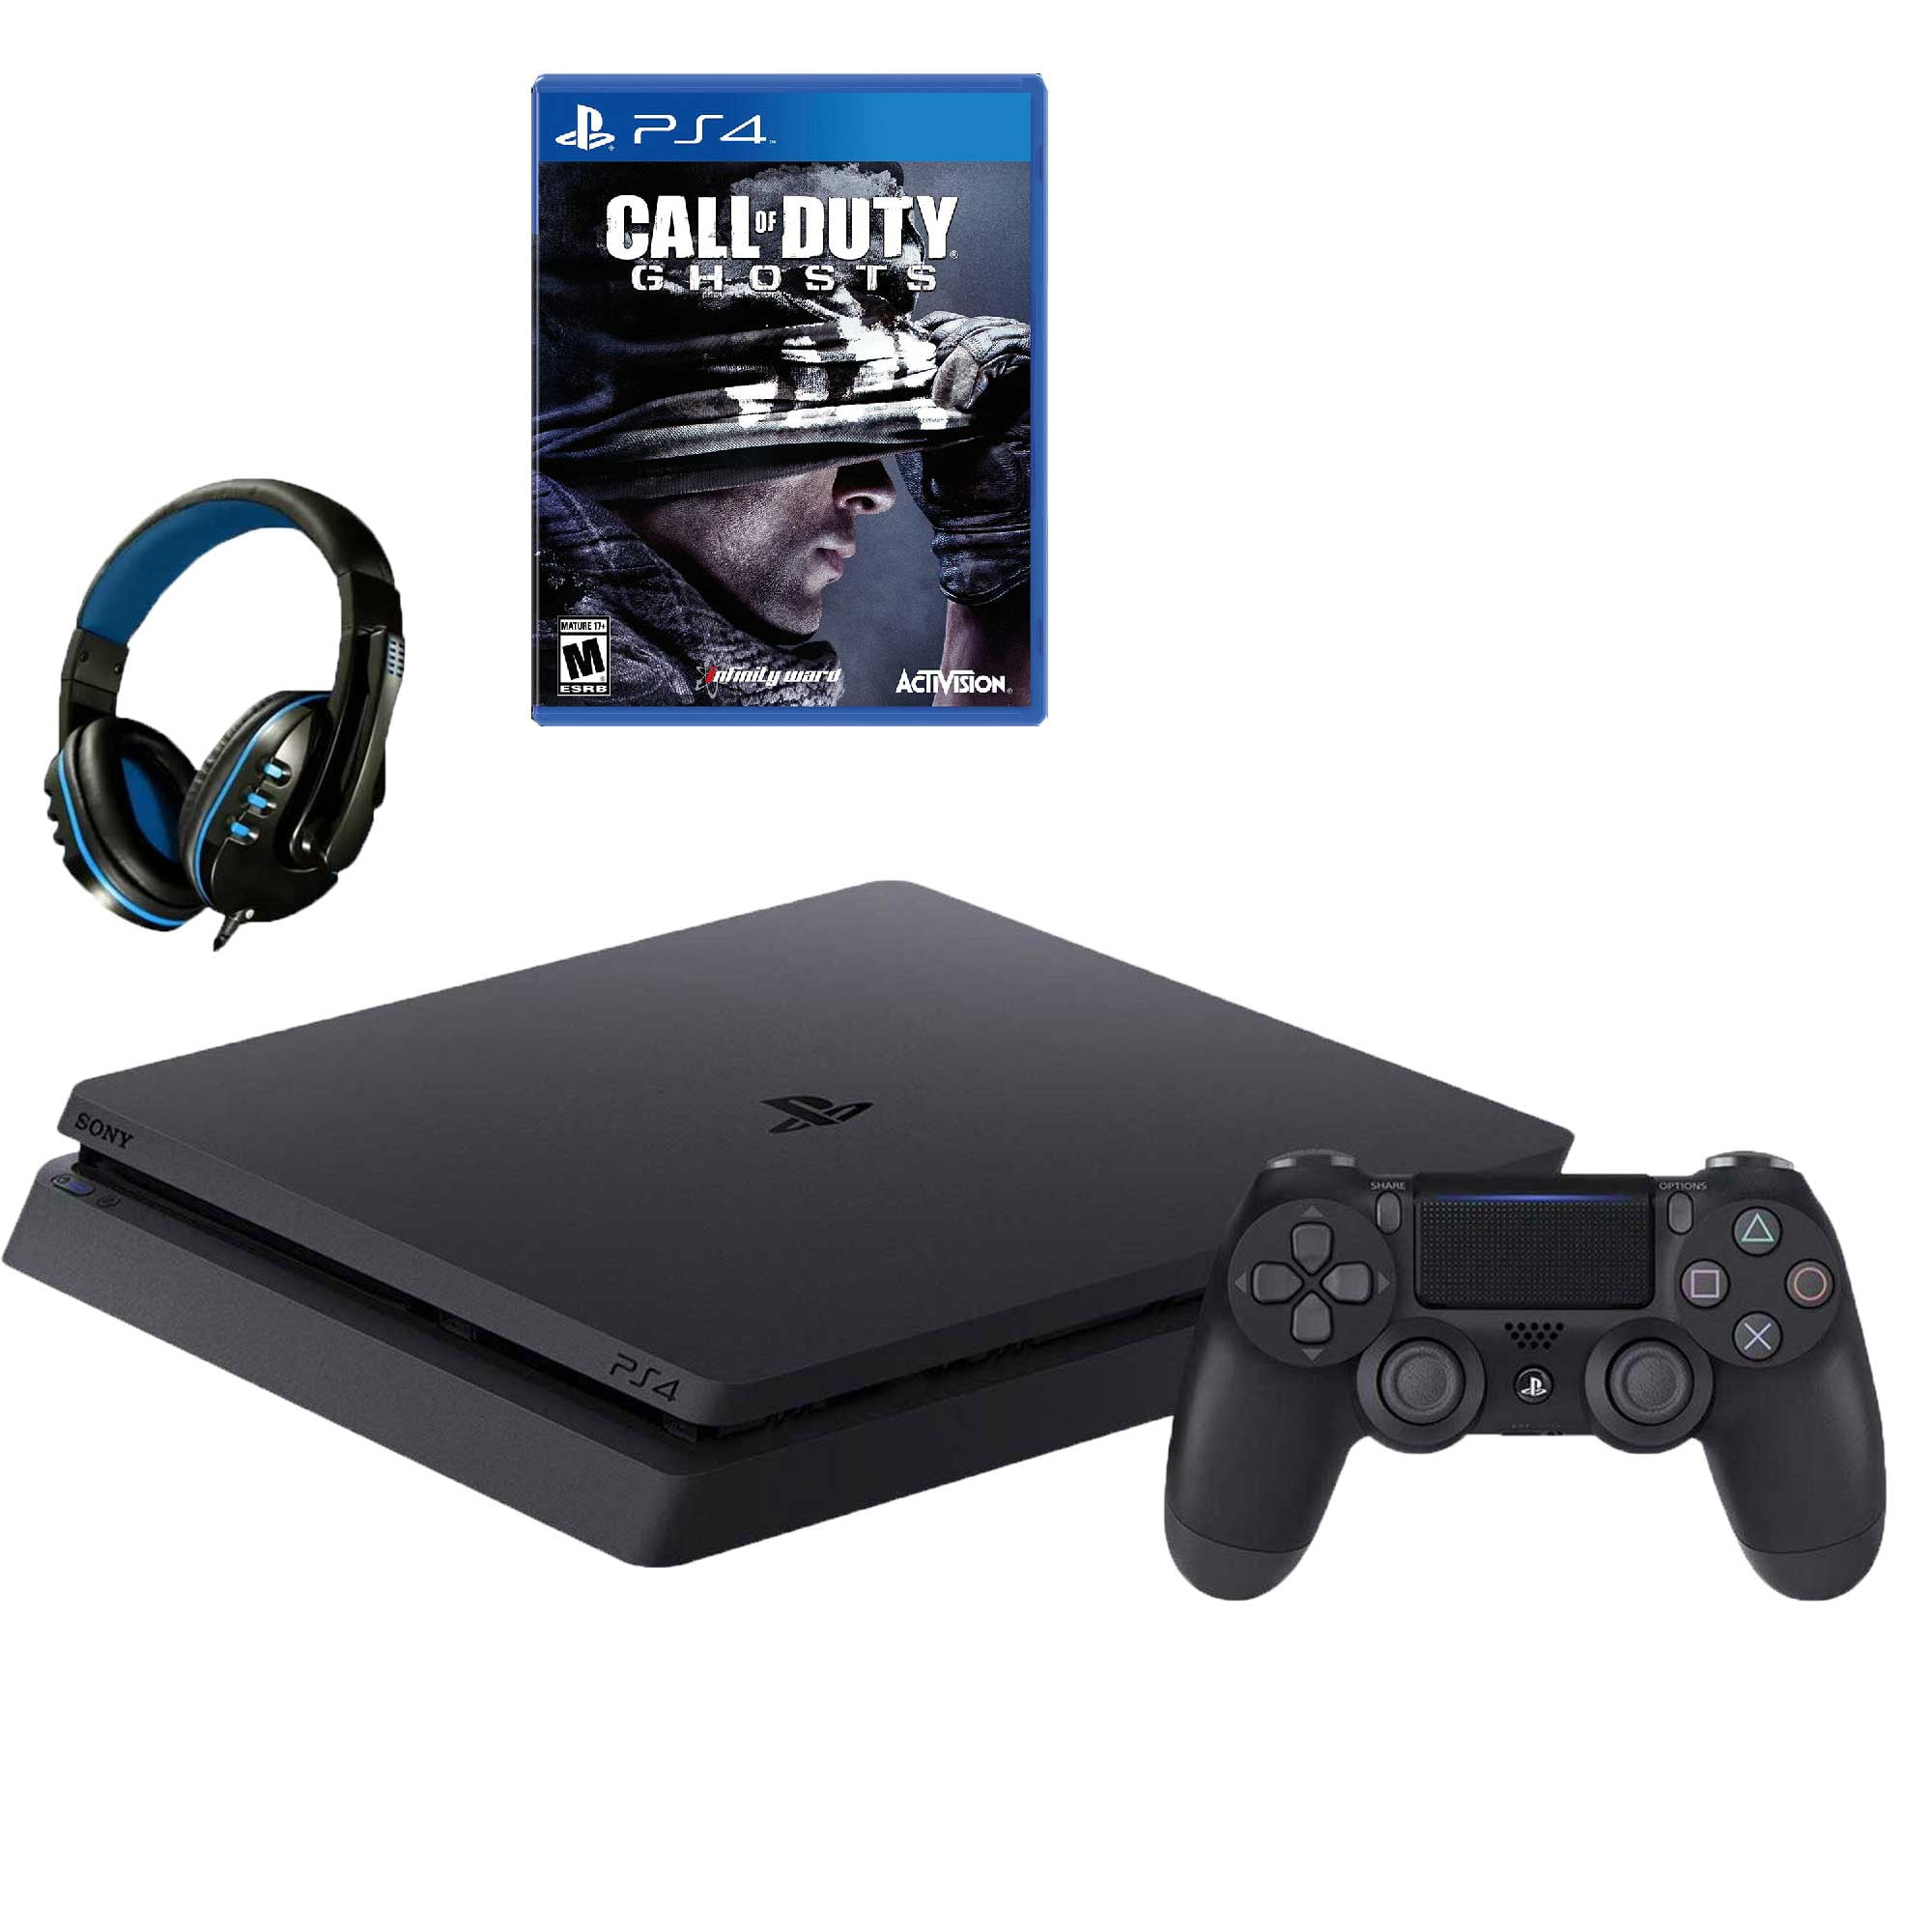 Sony PlayStation 4 500GB Gaming Console White with Call of Duty Ghosts BOLT  AXTION Bundle Used 